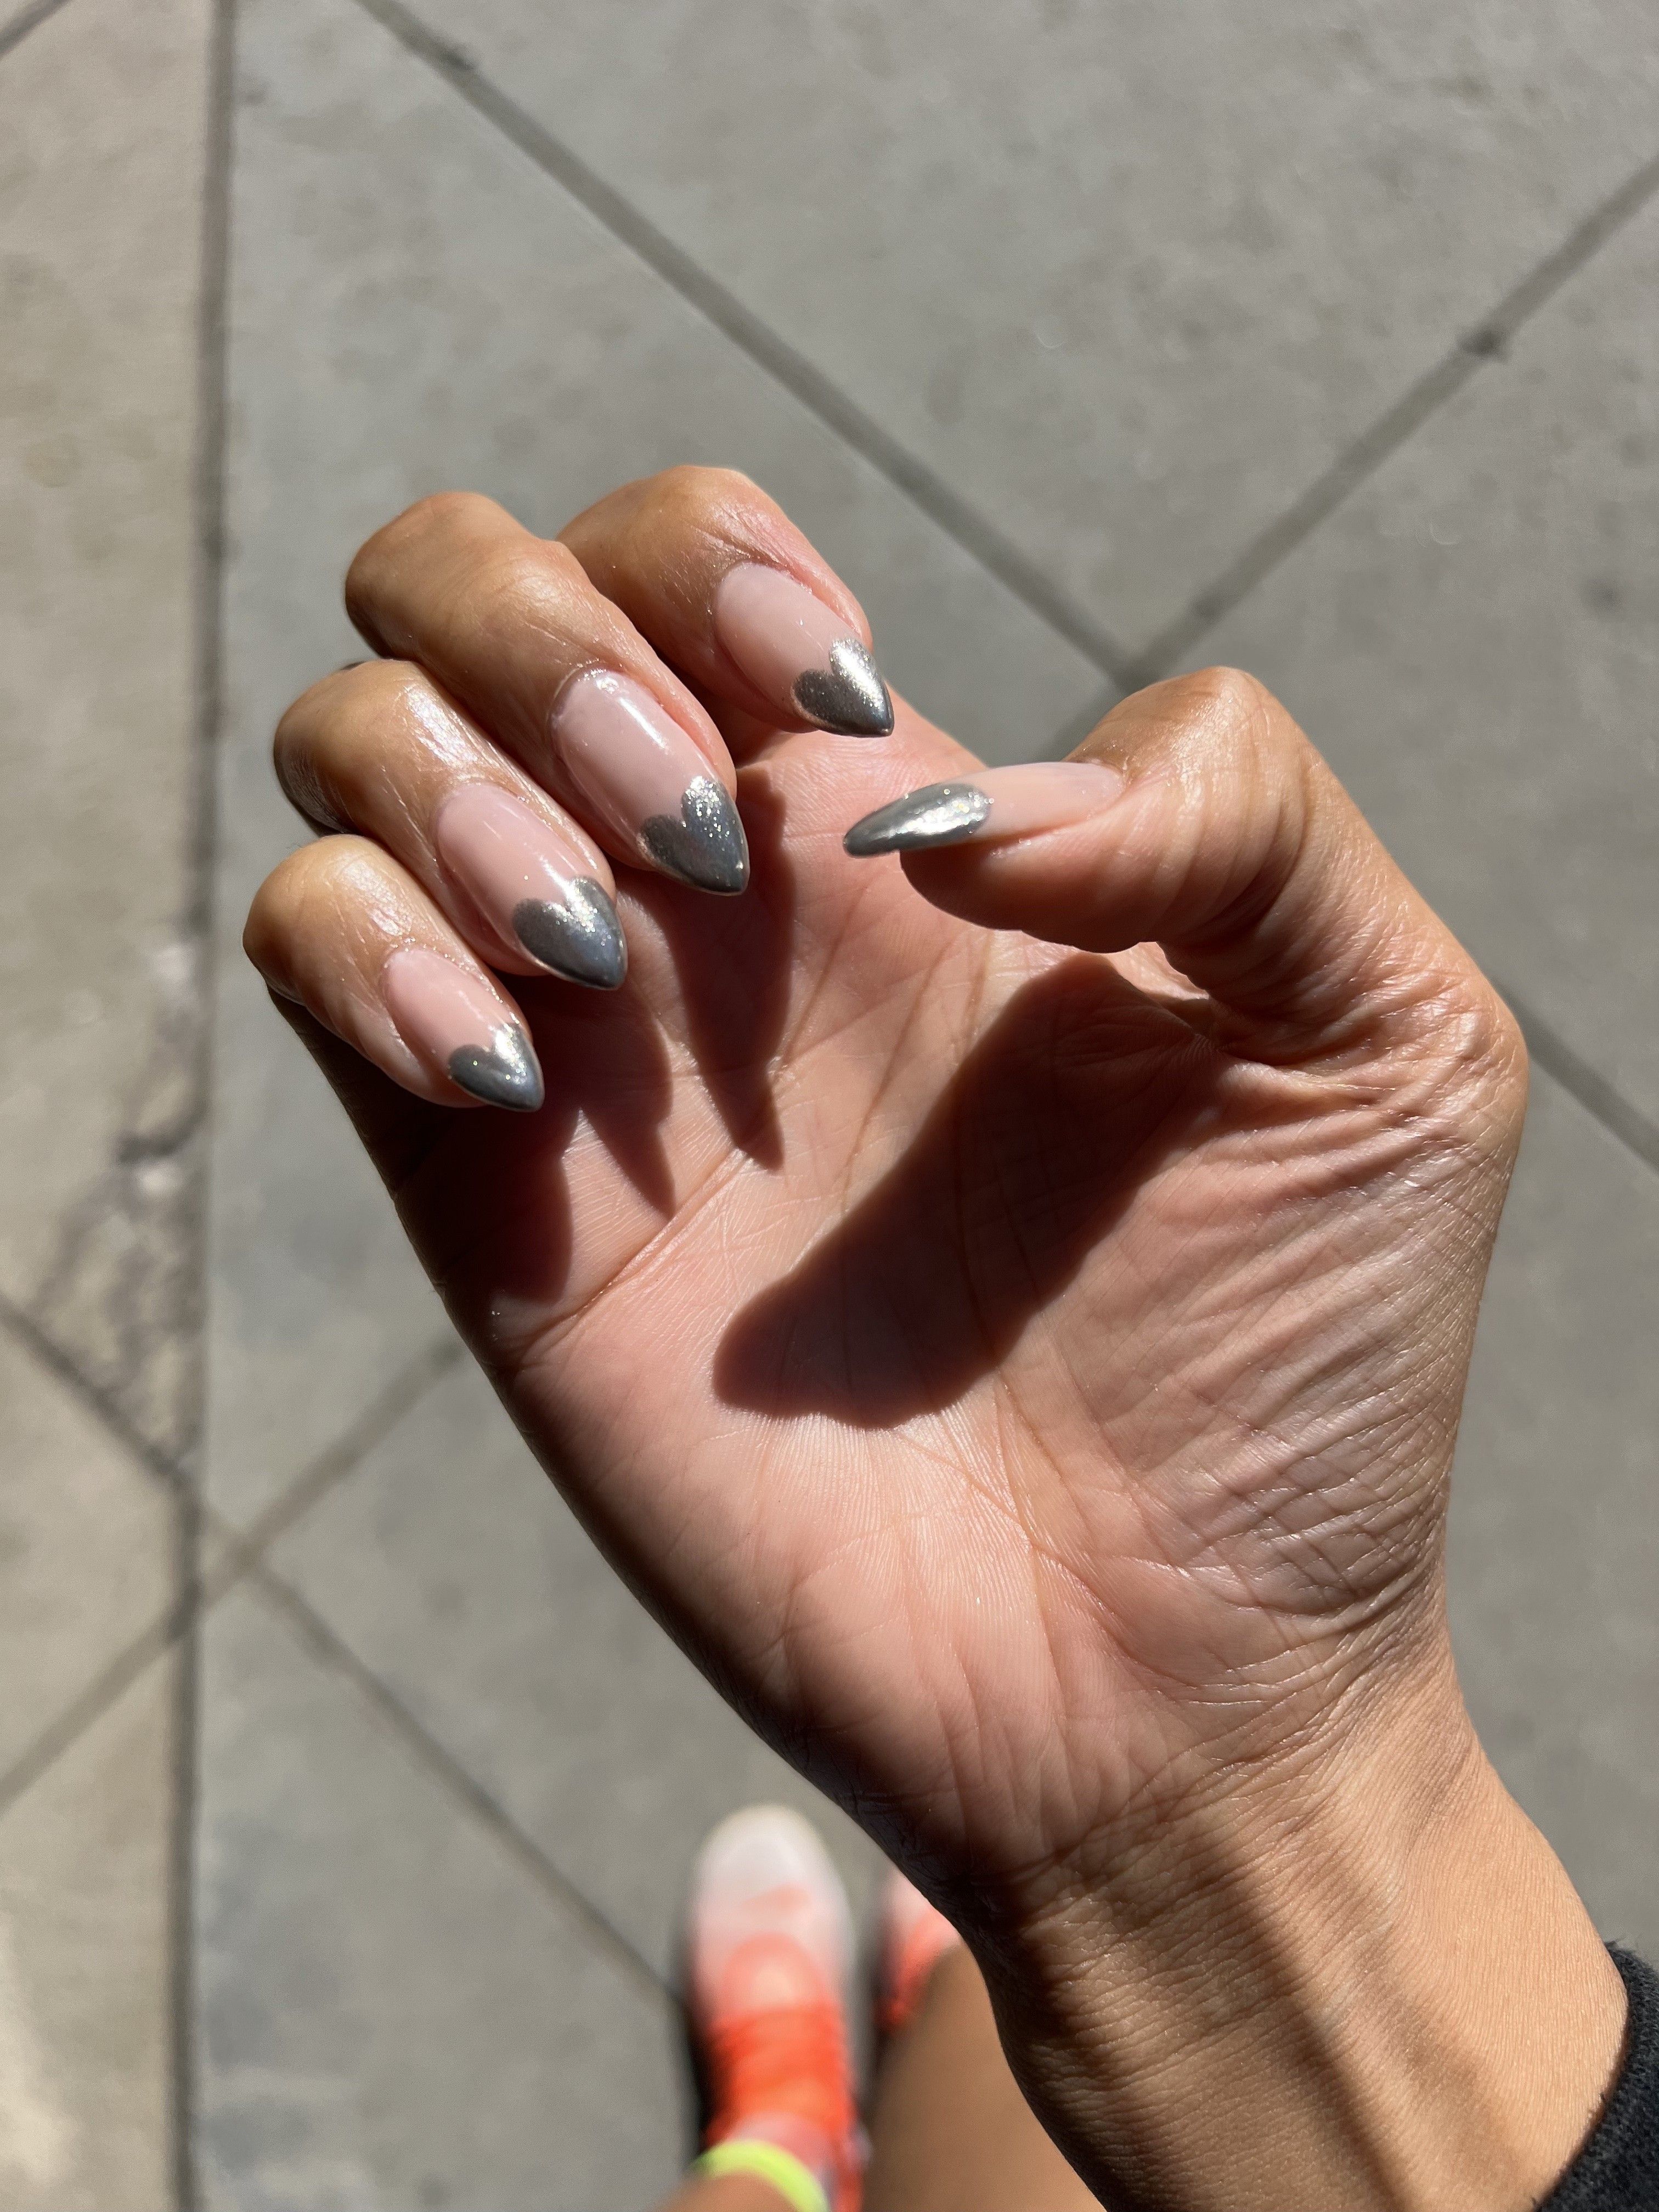 Any way to whiten nails that actually works? : r/RedditLaqueristas